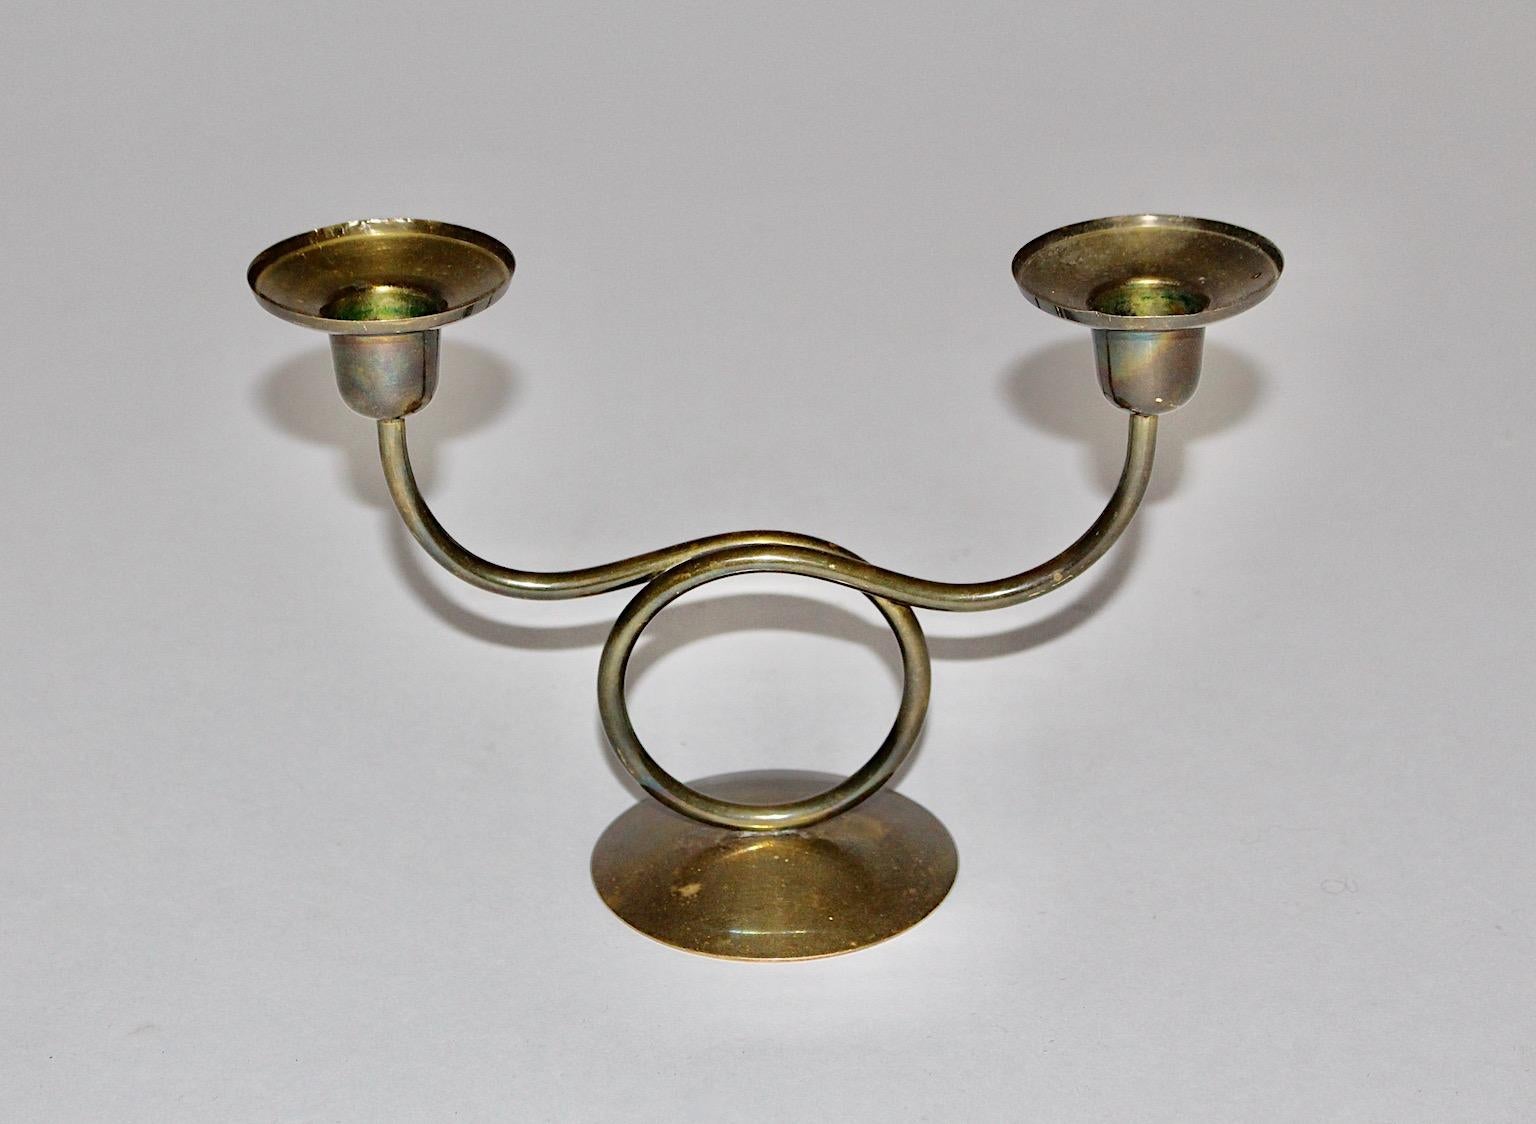 Mid Century Modern vintage candlesticks or candleholder attributed to Josef Frank for Svenskt Tenn 1950s Sweden from brass.
An amazing candlestick from brass with curved circular like decor with two tulles for candles.
Good original condition with